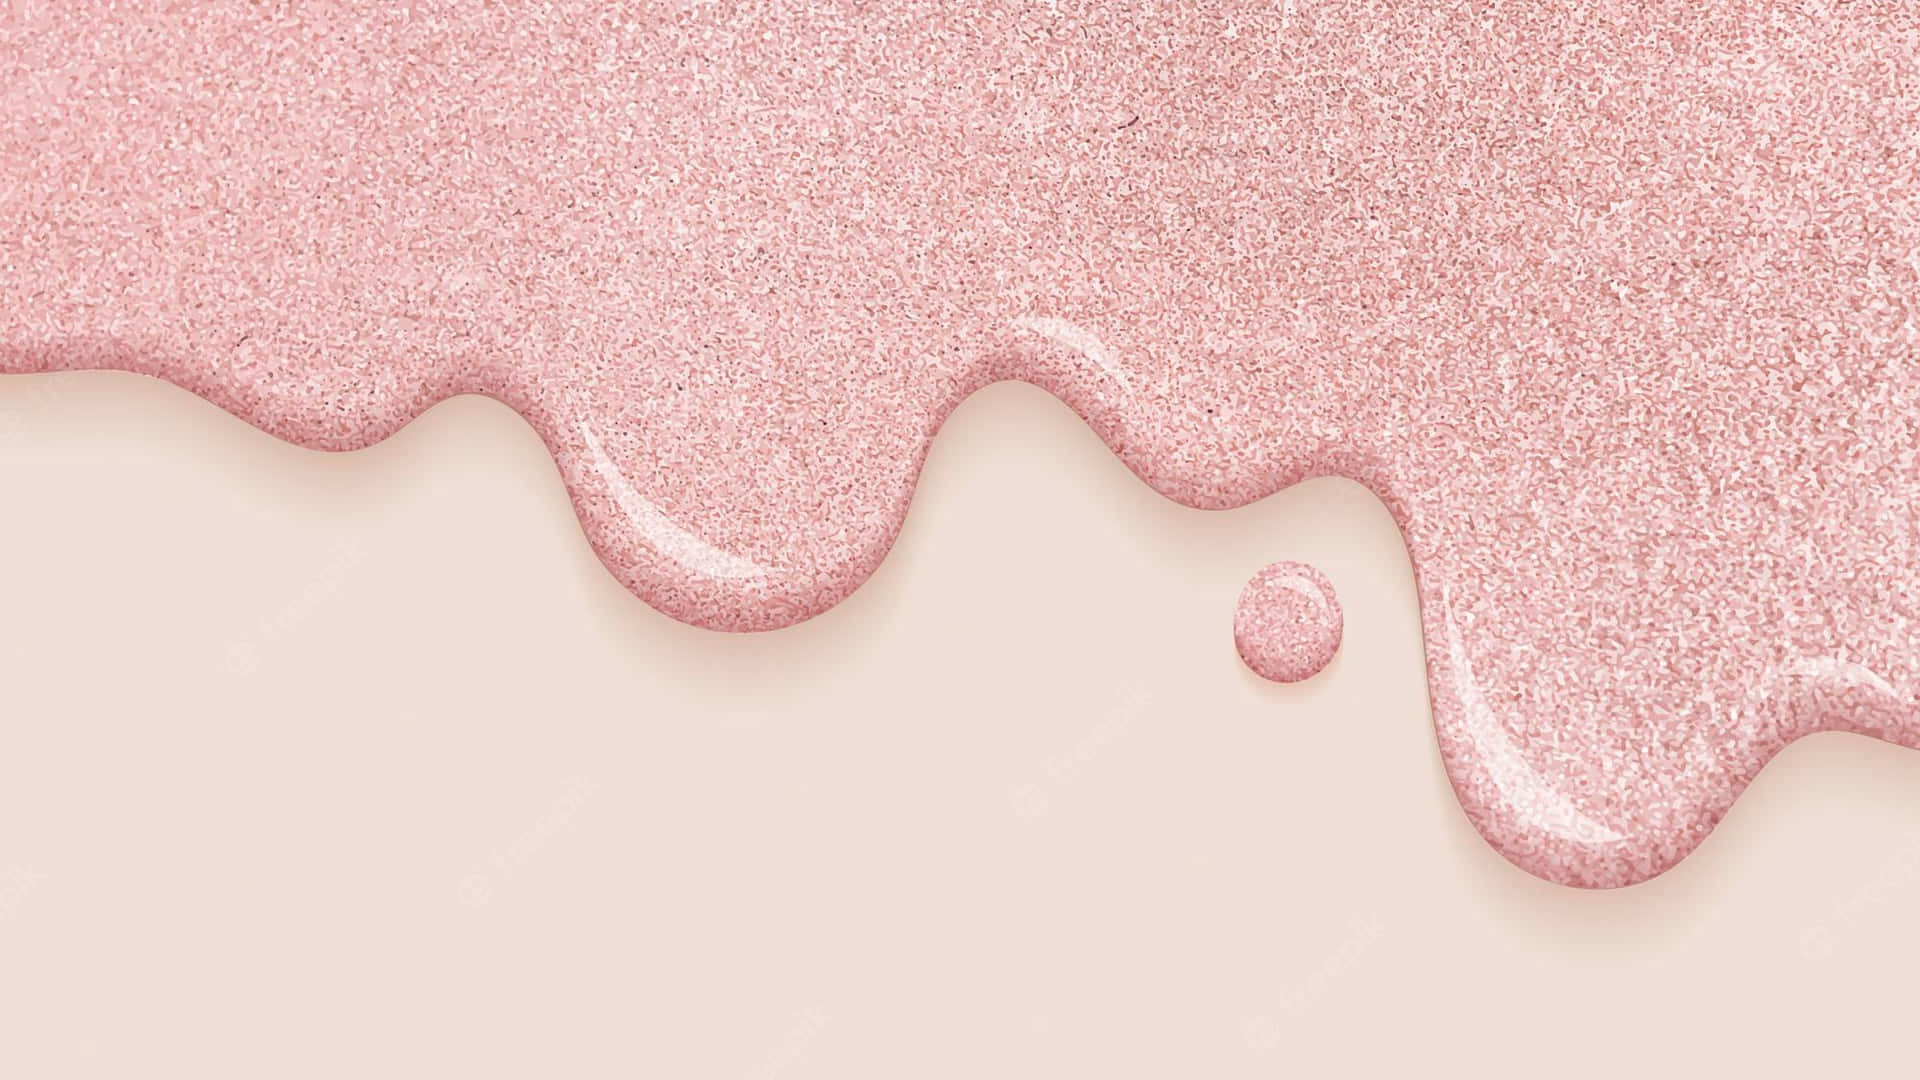 A Pink Liquid Dripping On A Pink Background Wallpaper